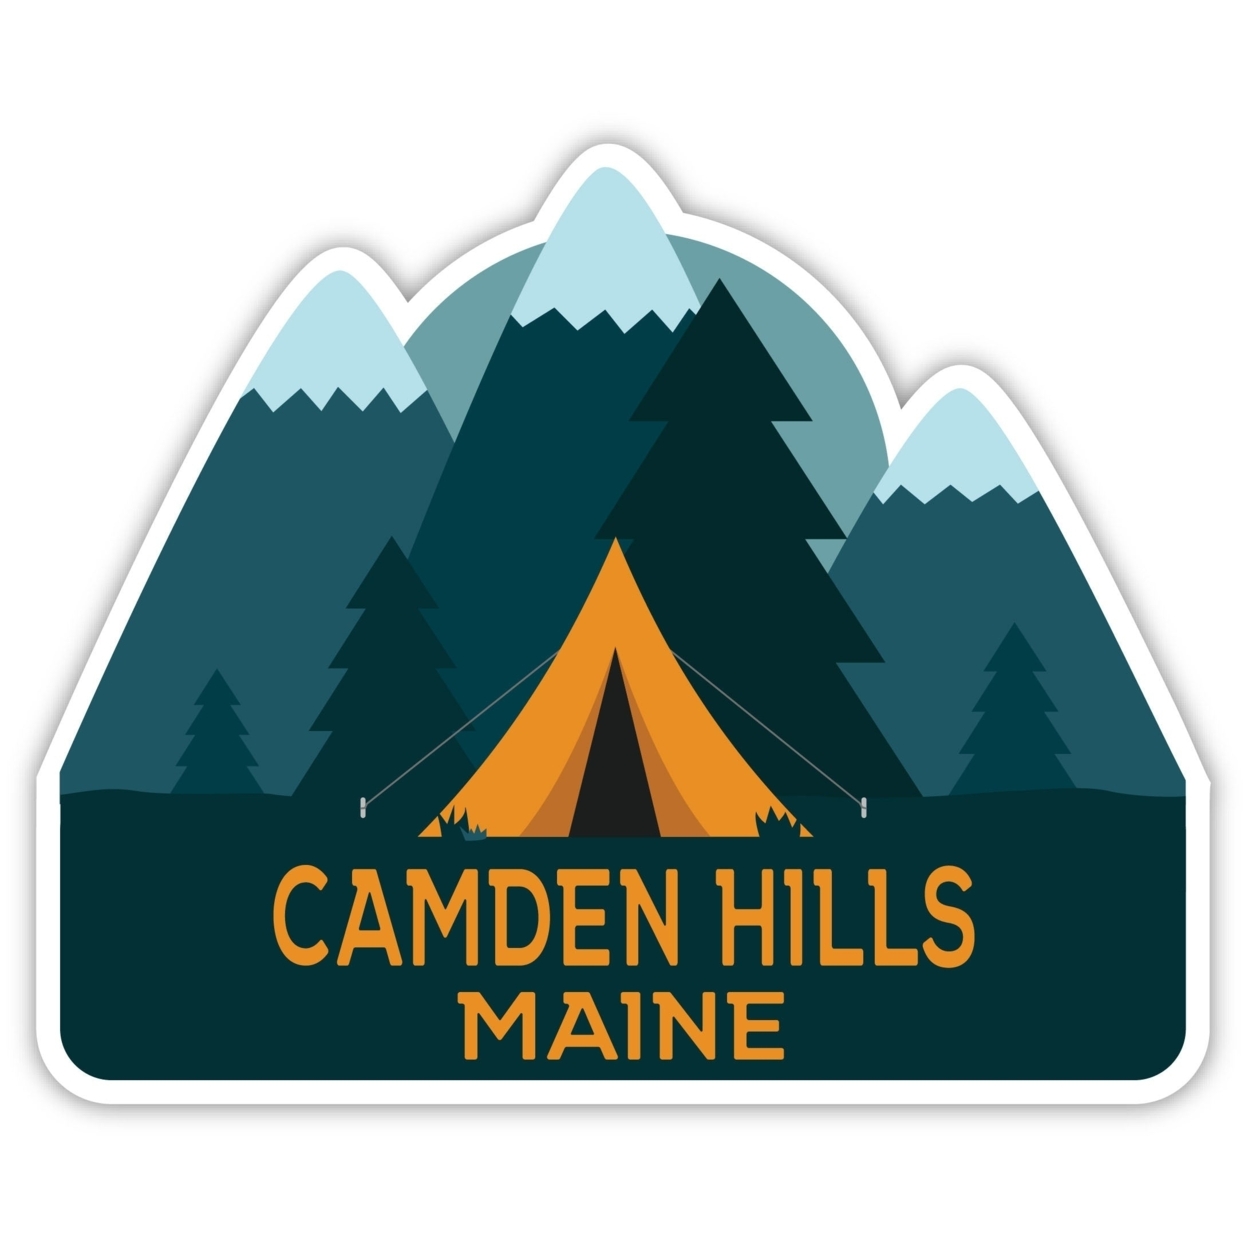 Camden Hills Maine Souvenir Decorative Stickers (Choose Theme And Size) - 4-Pack, 10-Inch, Tent